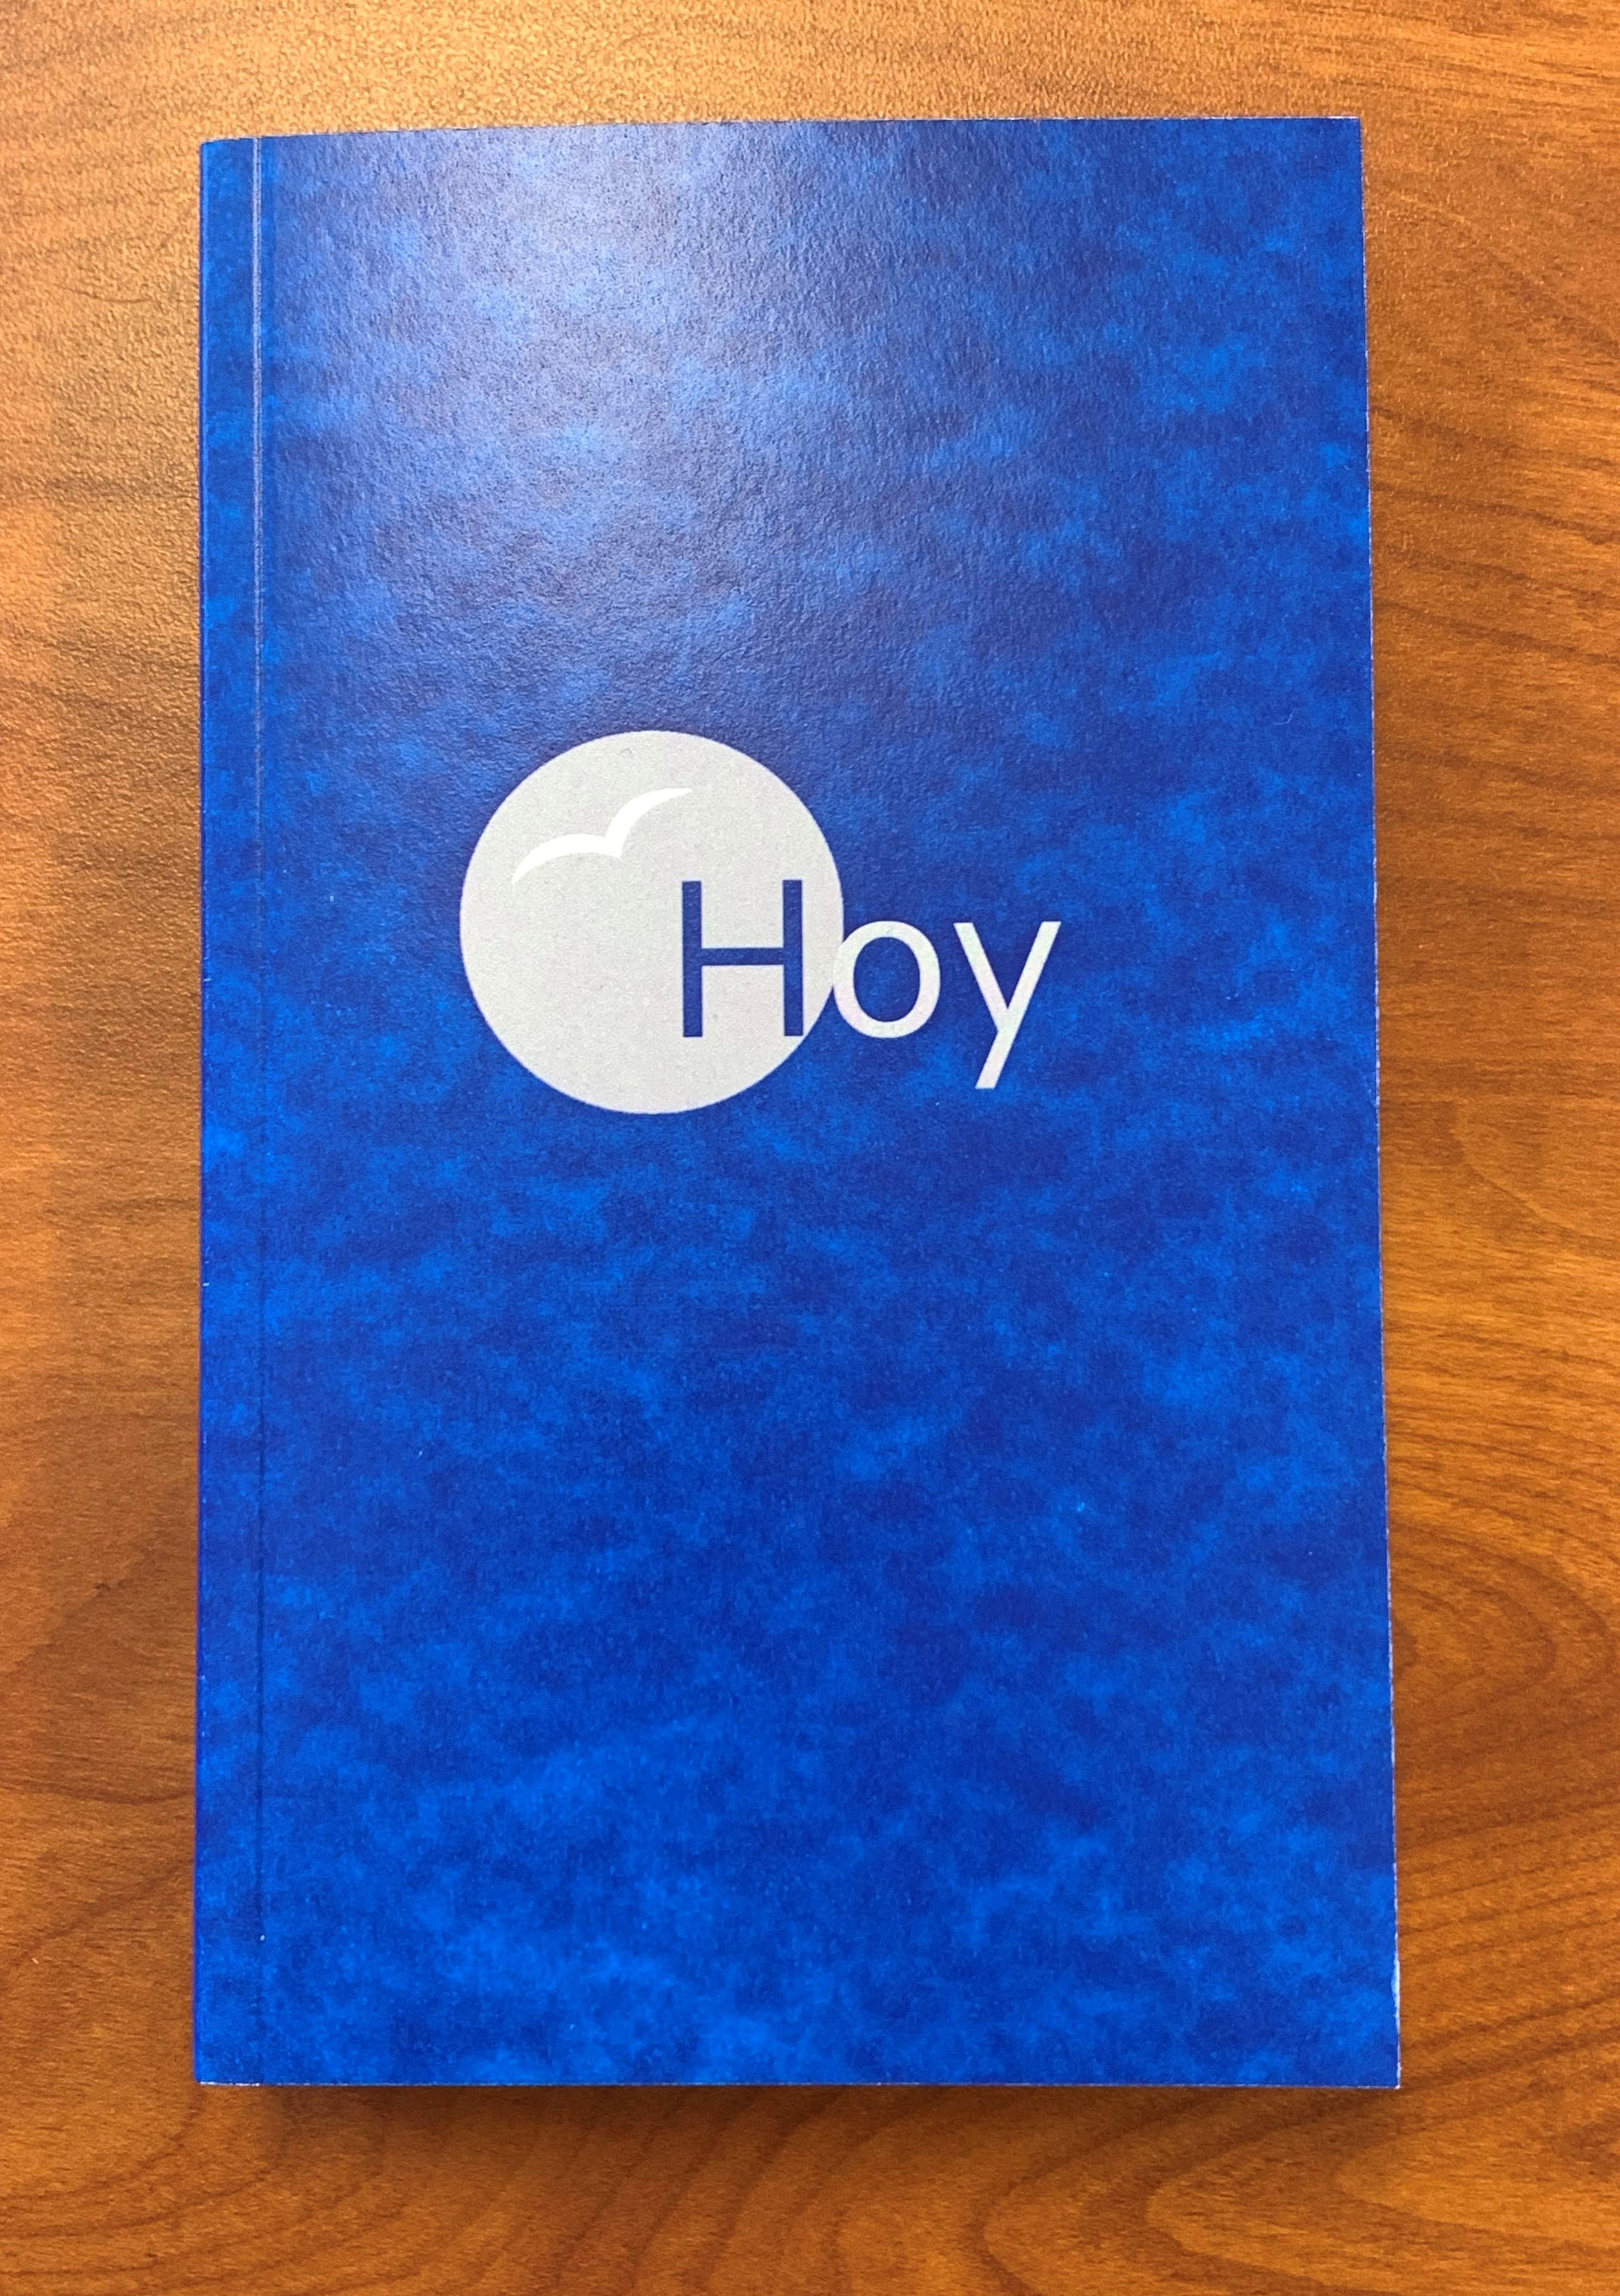 "Hoy" ("Today" Book in Spanish)